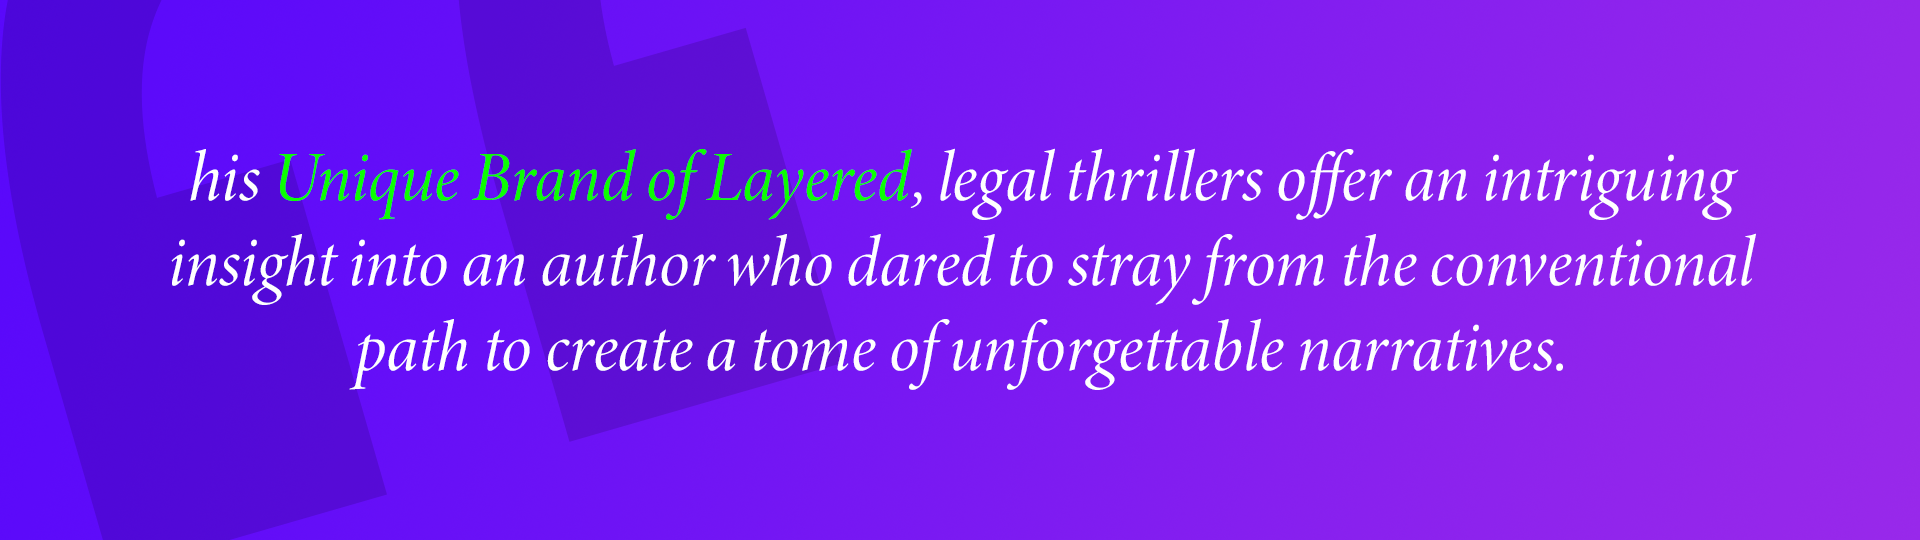 his Unique Brand of Layered, legal thrillers offer an intriguing
insight into an author who dared to stray from the conventional path to create a tome of unforgettable narratives.